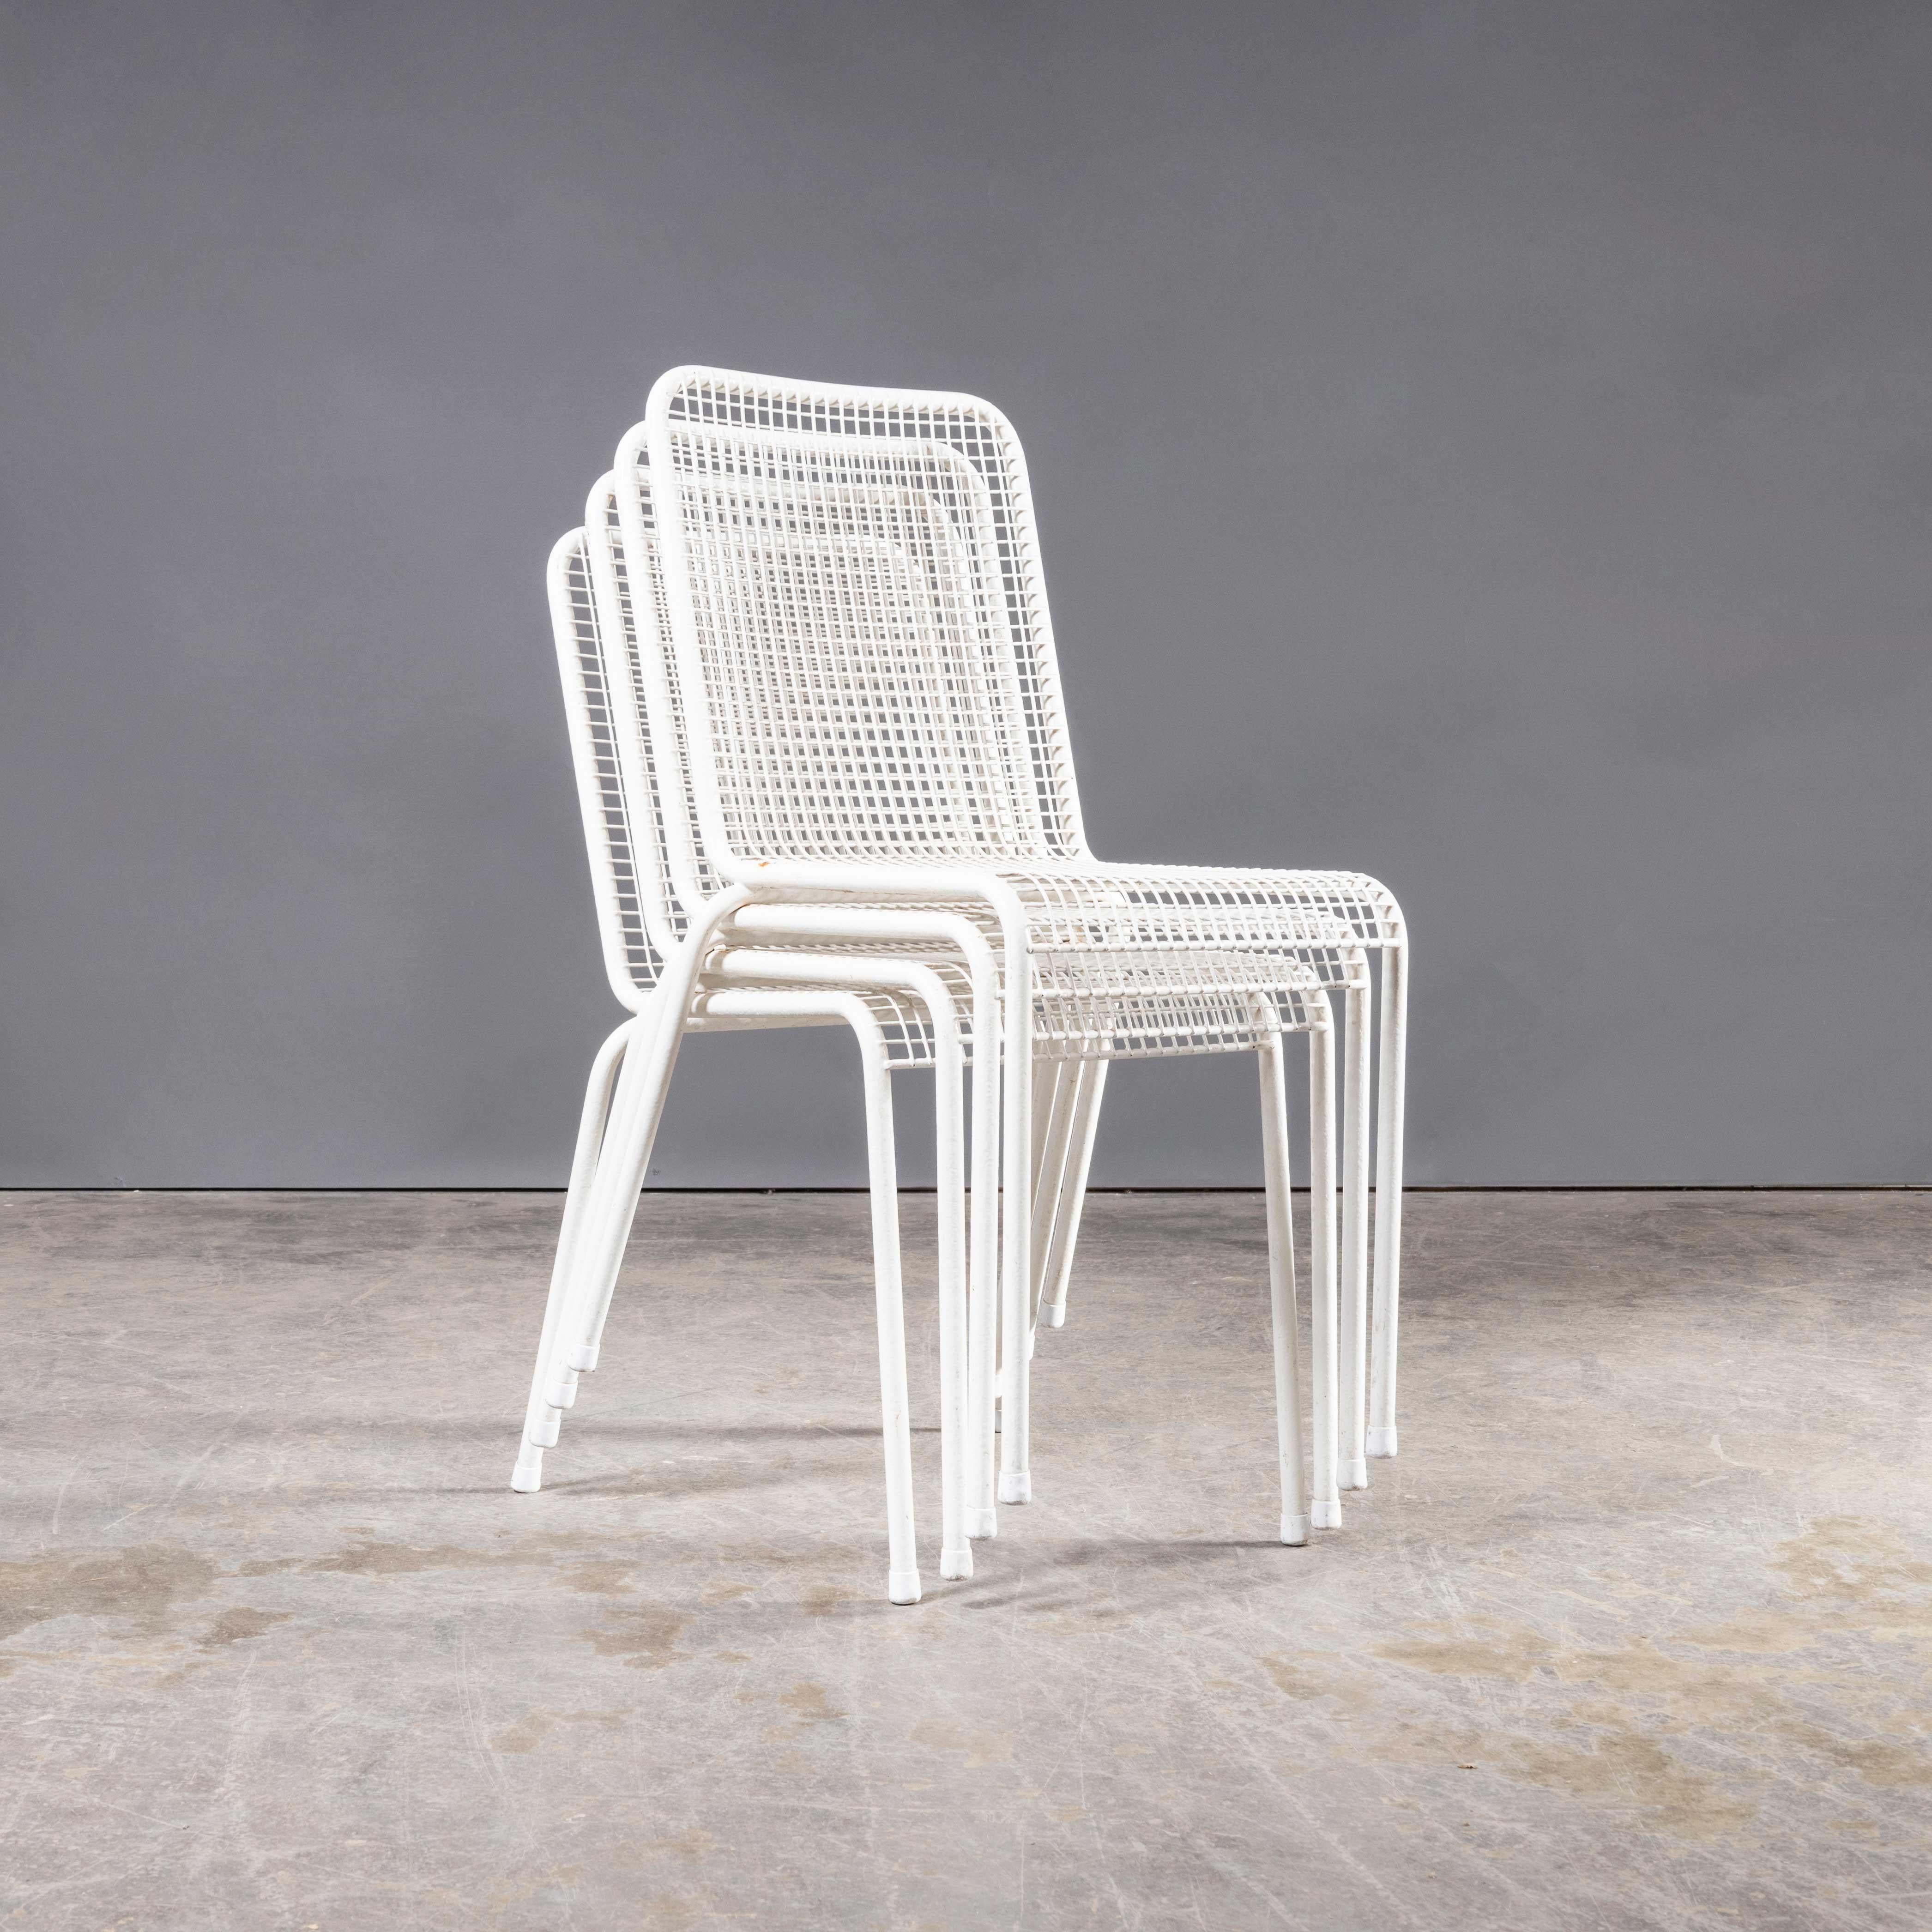 1970’s French Original Wire Mesh White Outdoor Dining Chairs – Set Of Four
1970’s French Original Wire Mesh White Outdoor Dining Chairs – Set Of Four. Simple stylish outdoor chairs from France. The frames are steel which was plastic coated, a new